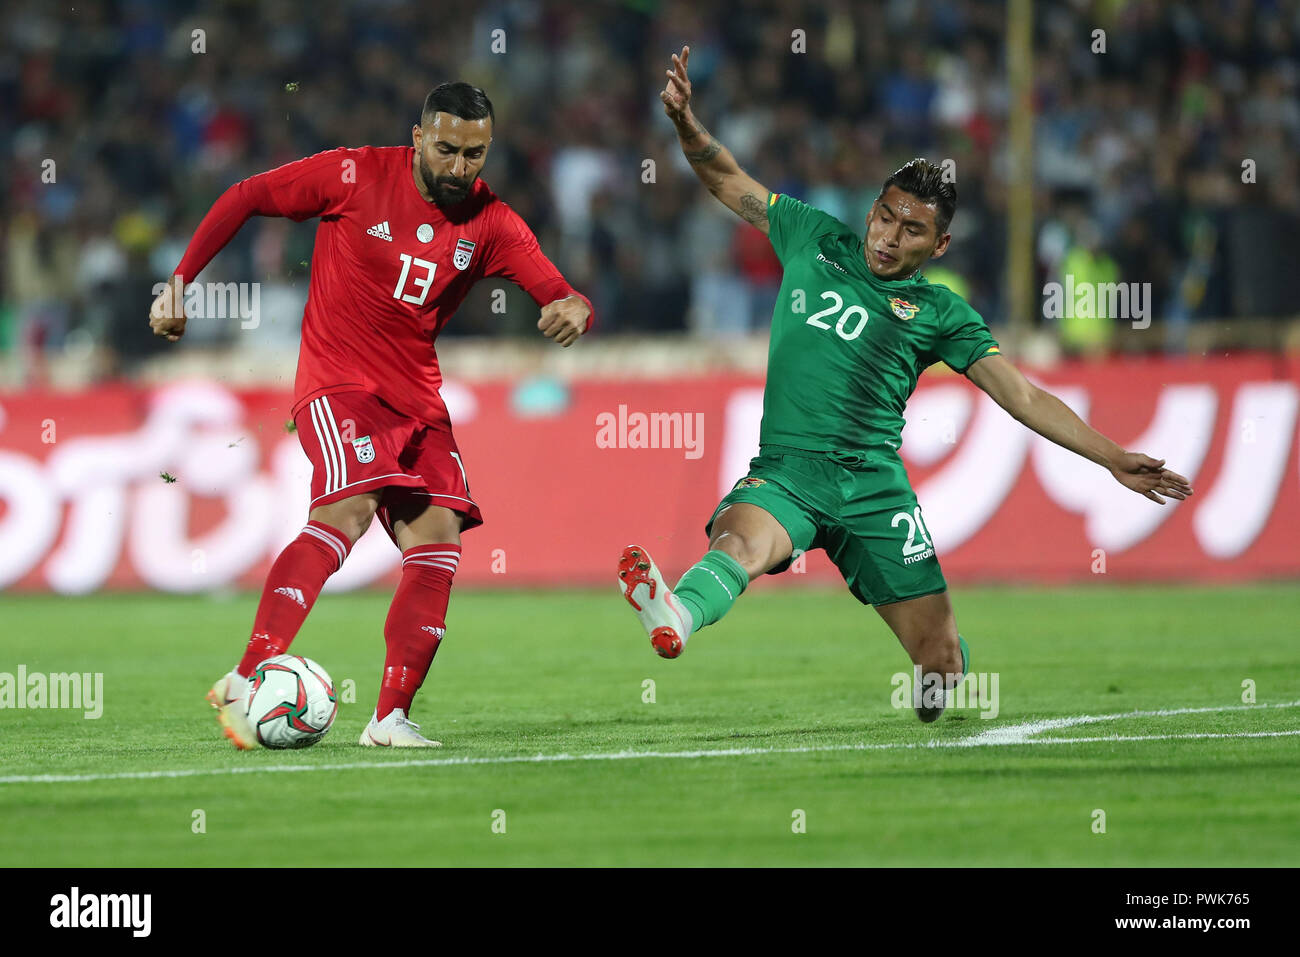 Tehran, Iran. 16th Oct, 2018. Iran's Saman Ghoddos and Bolivia's Rudy Cardozo battle for the ball during an International Friendly soccer match between Iran and Bolivia at the Azadi Stadium. The Iranian authorities have allowed women to attend the match after a request from the Football Federation of the Islamic Republic of Iran. Credit: Saeid Zareian/dpa/Alamy Live News Stock Photo